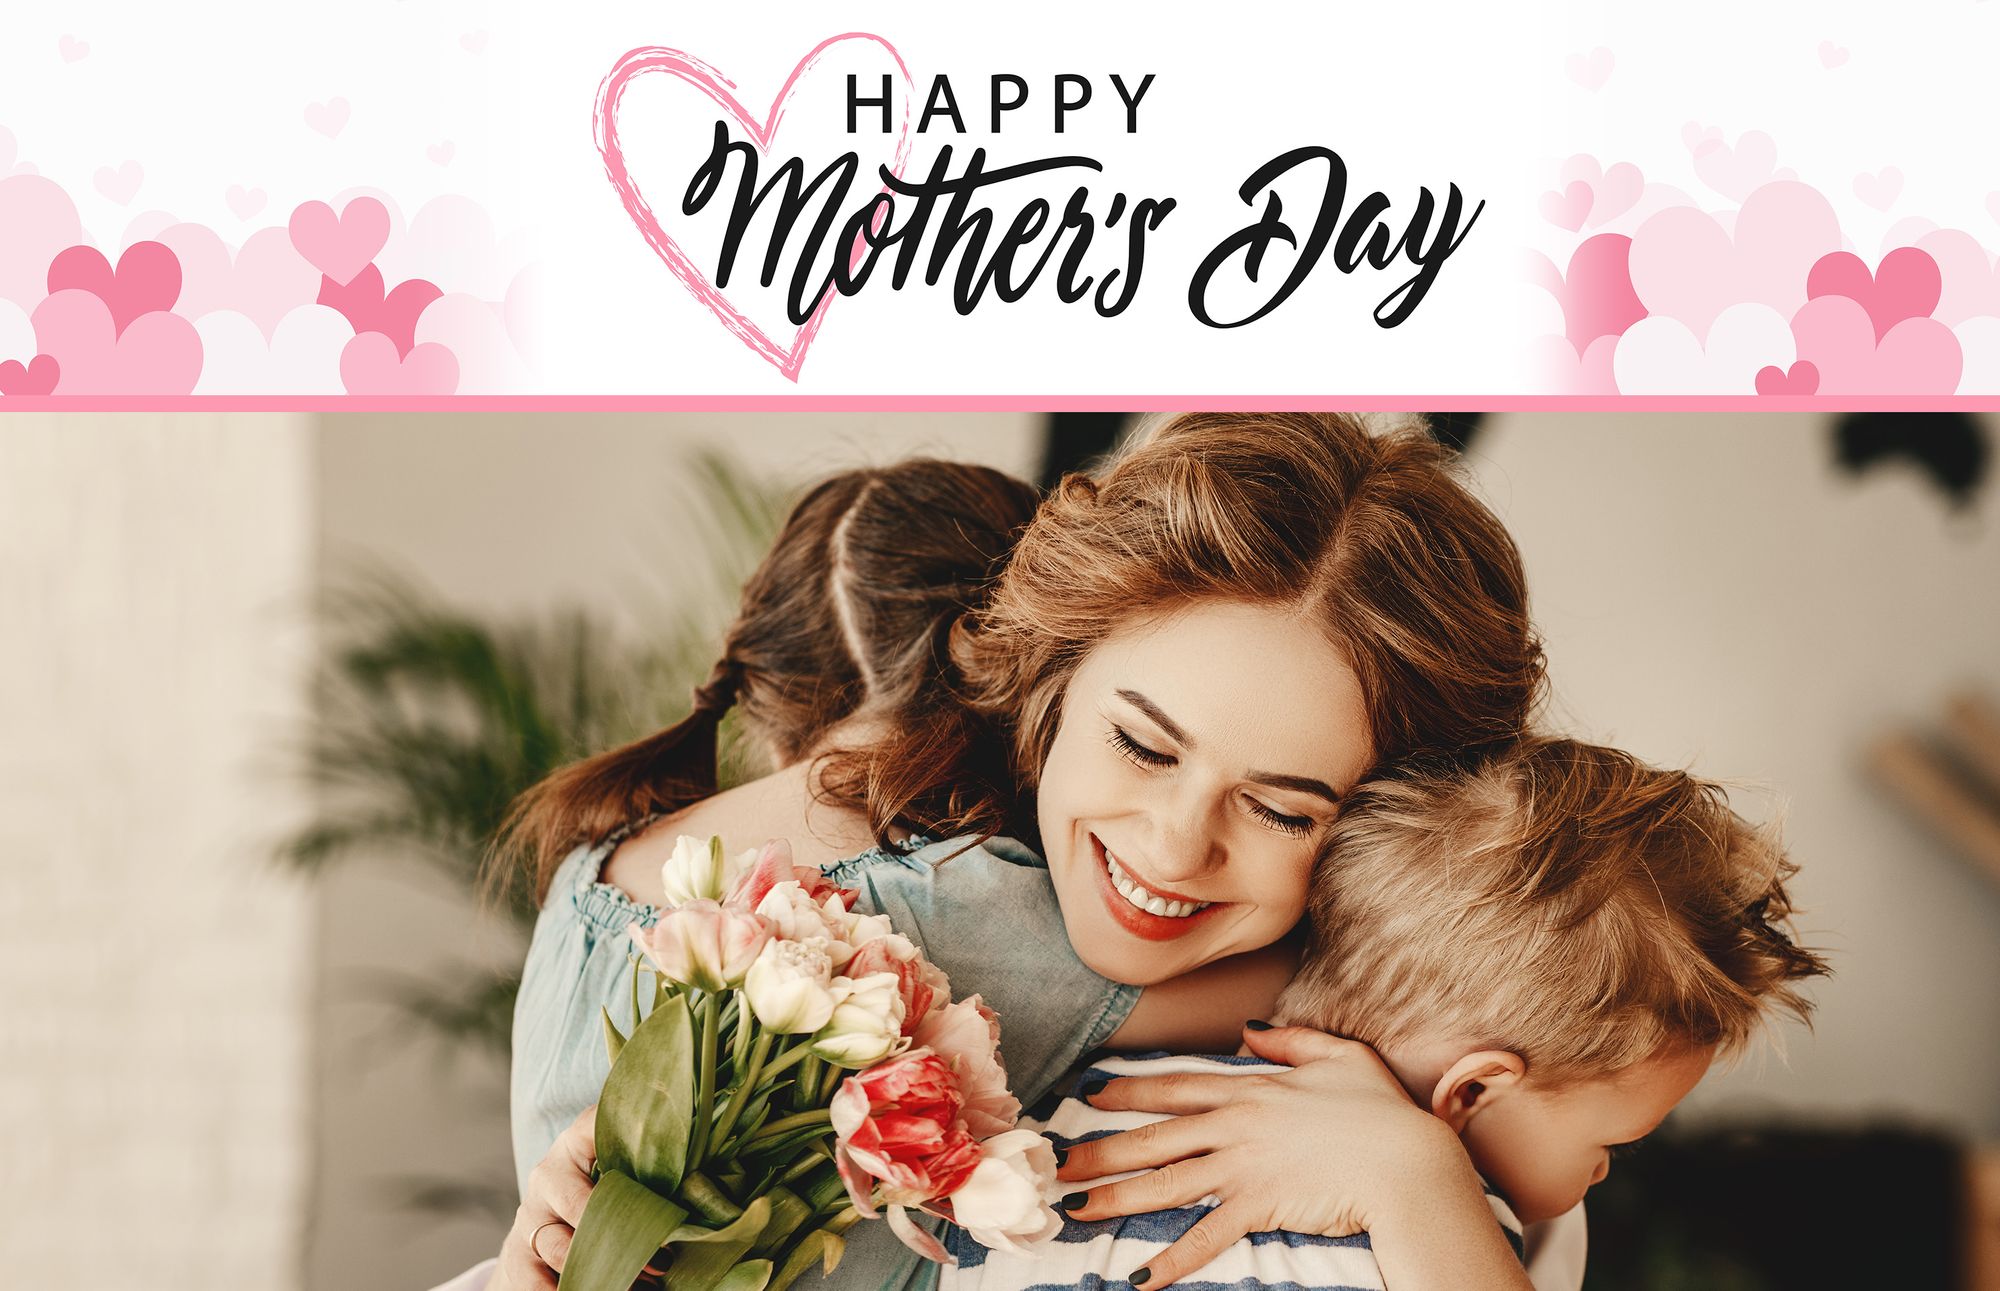 Fun Ideas To Treat Your Mom This Mother's Day